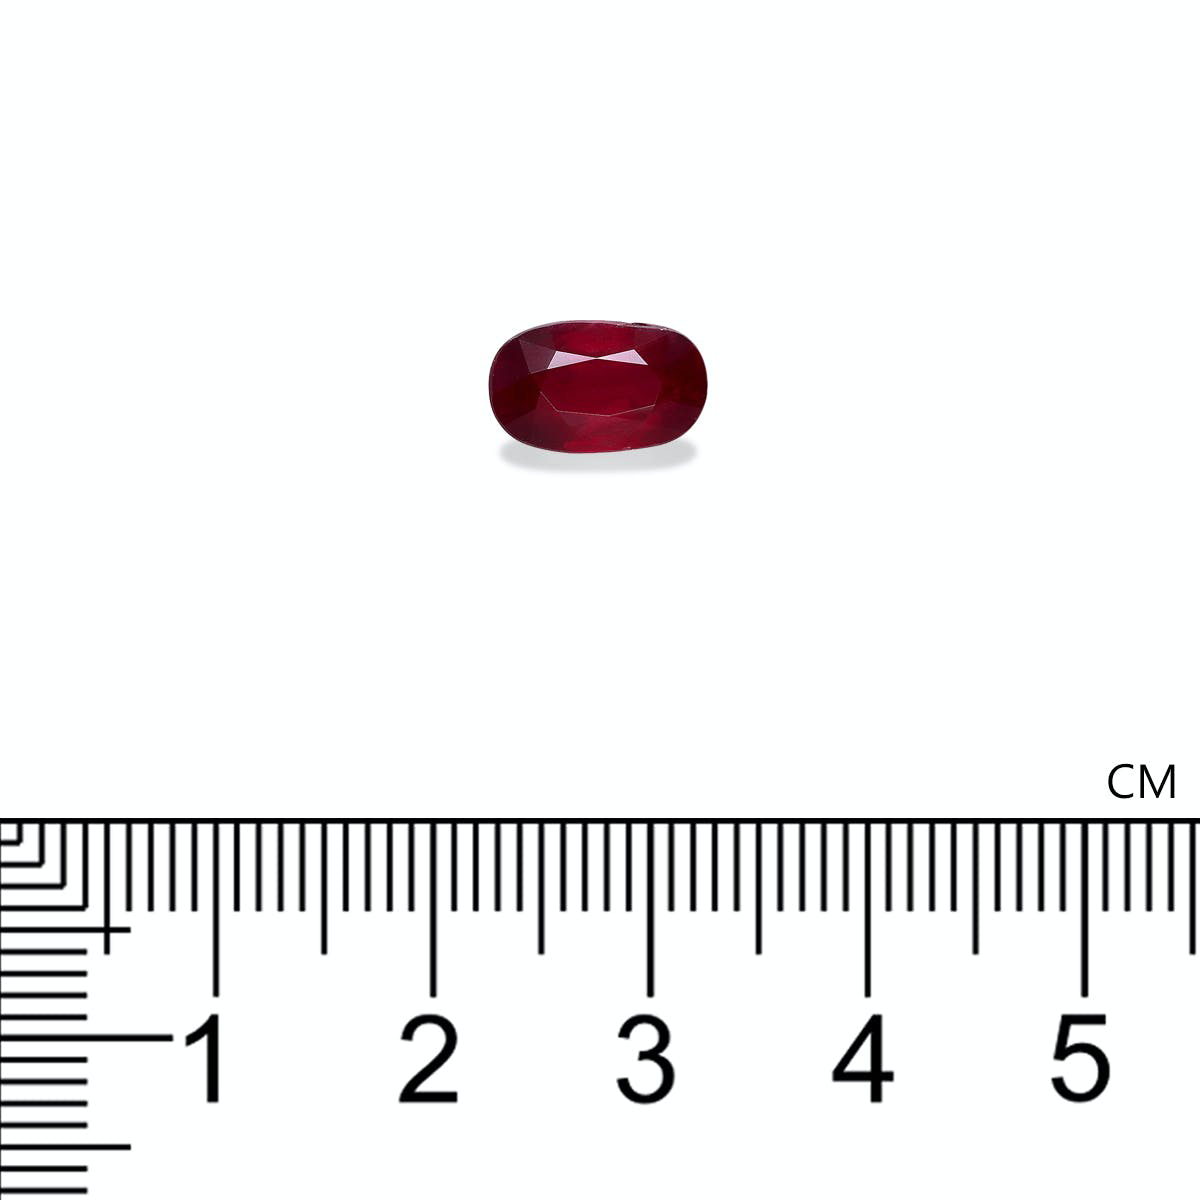 Picture of Pigeons Blood Unheated Mozambique Ruby 3.01ct (B44-05)